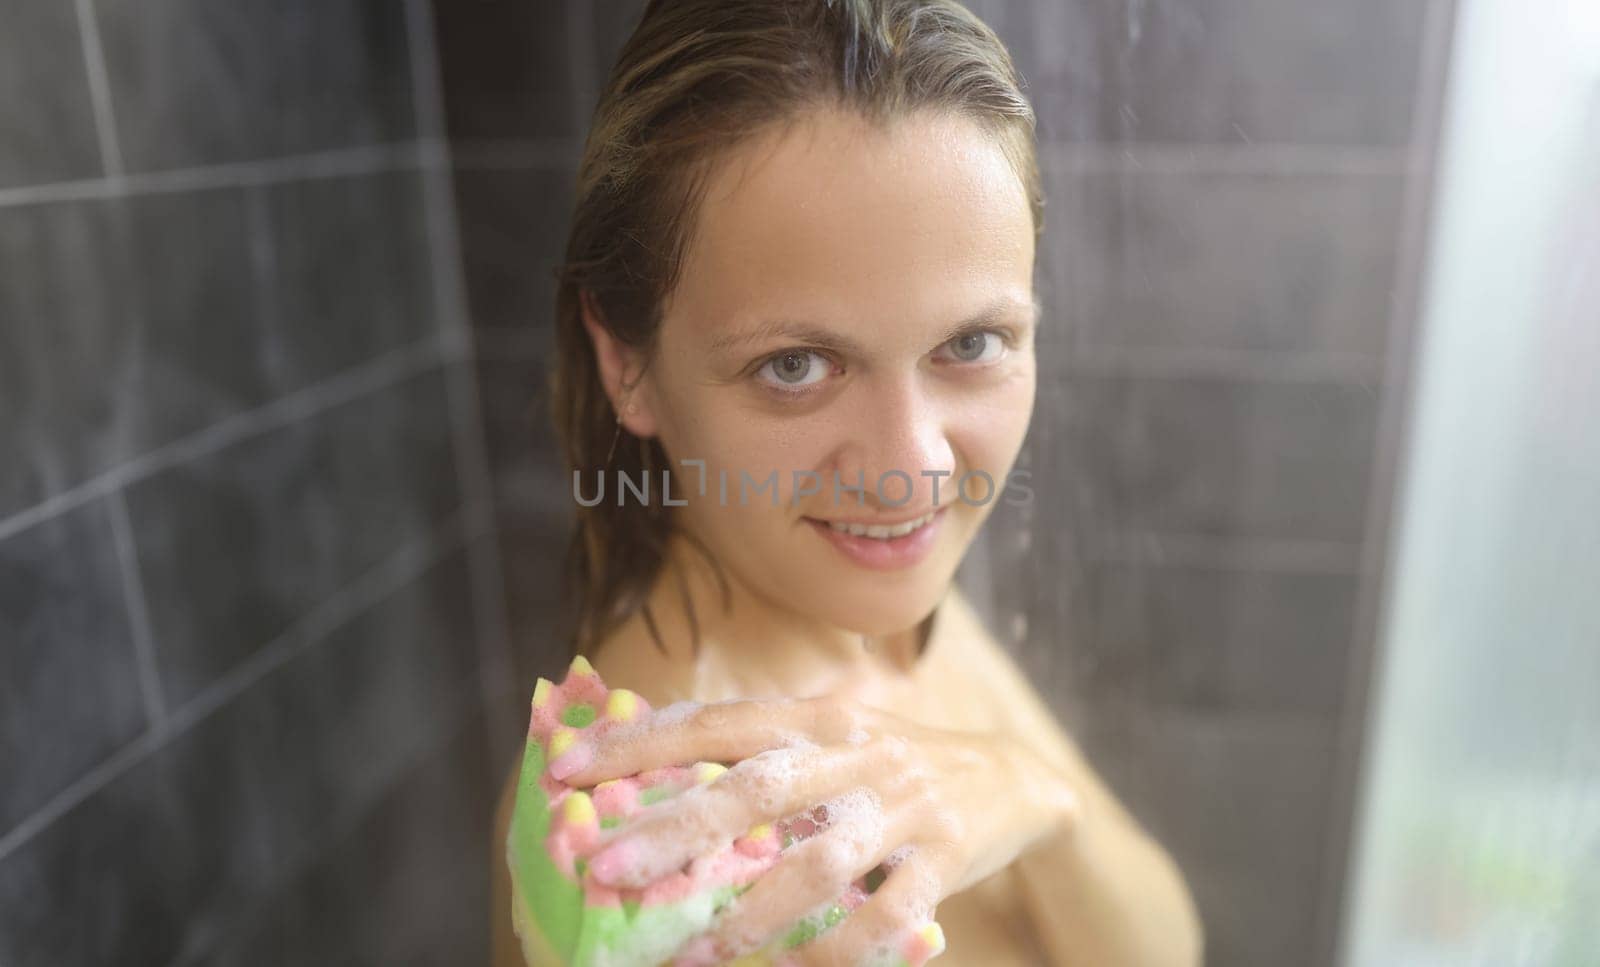 Portrait of young woman take hot shower after hard day, cleansing with washcloth. Female topless enjoying running water, release tension. Hygiene concept